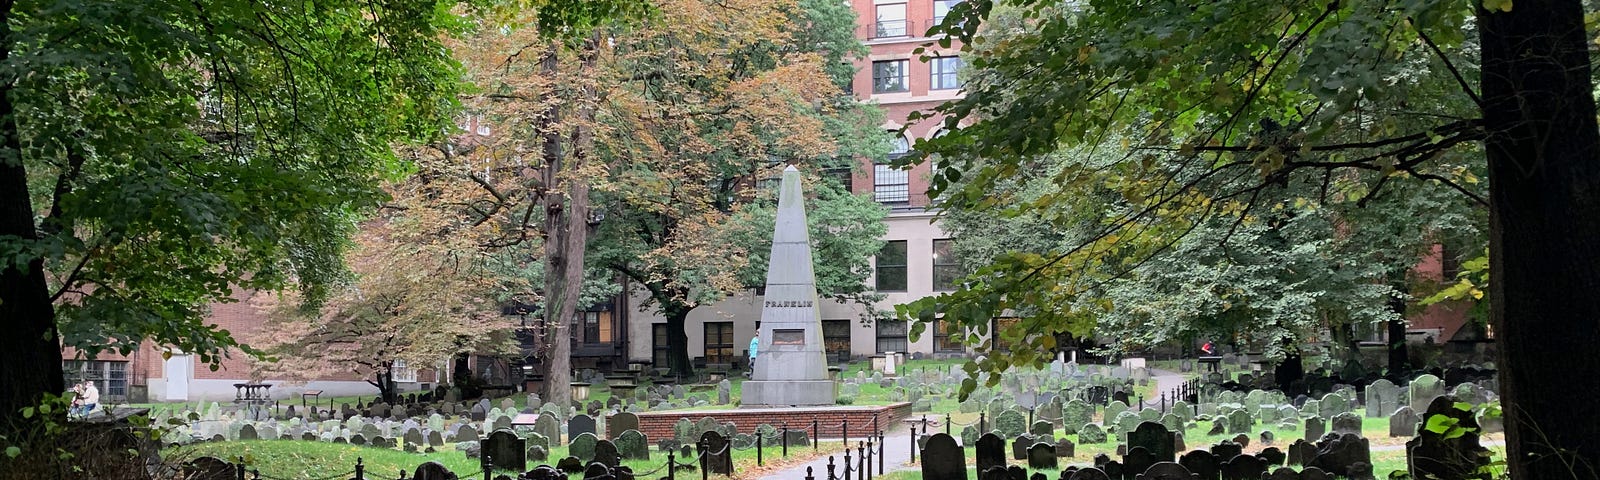 Granary Cemetry in Boston. Tombstones and trees.